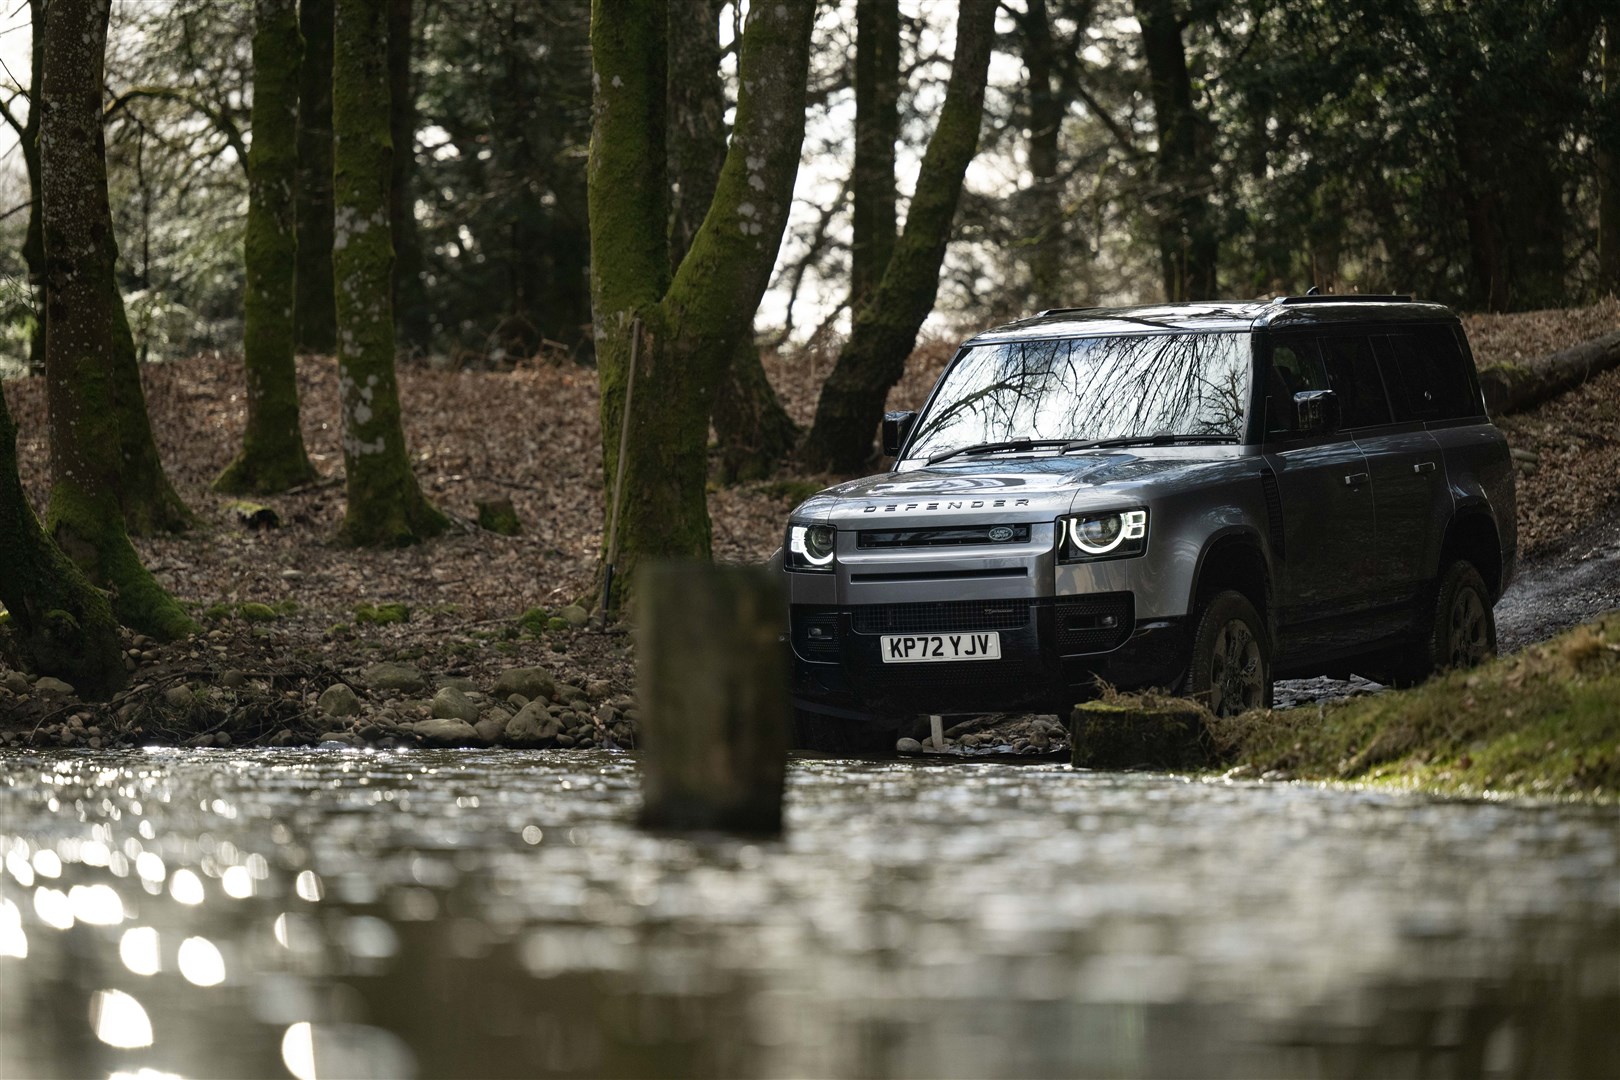 The Land Rover Defender takes outdoor challenges in its considerable stride.